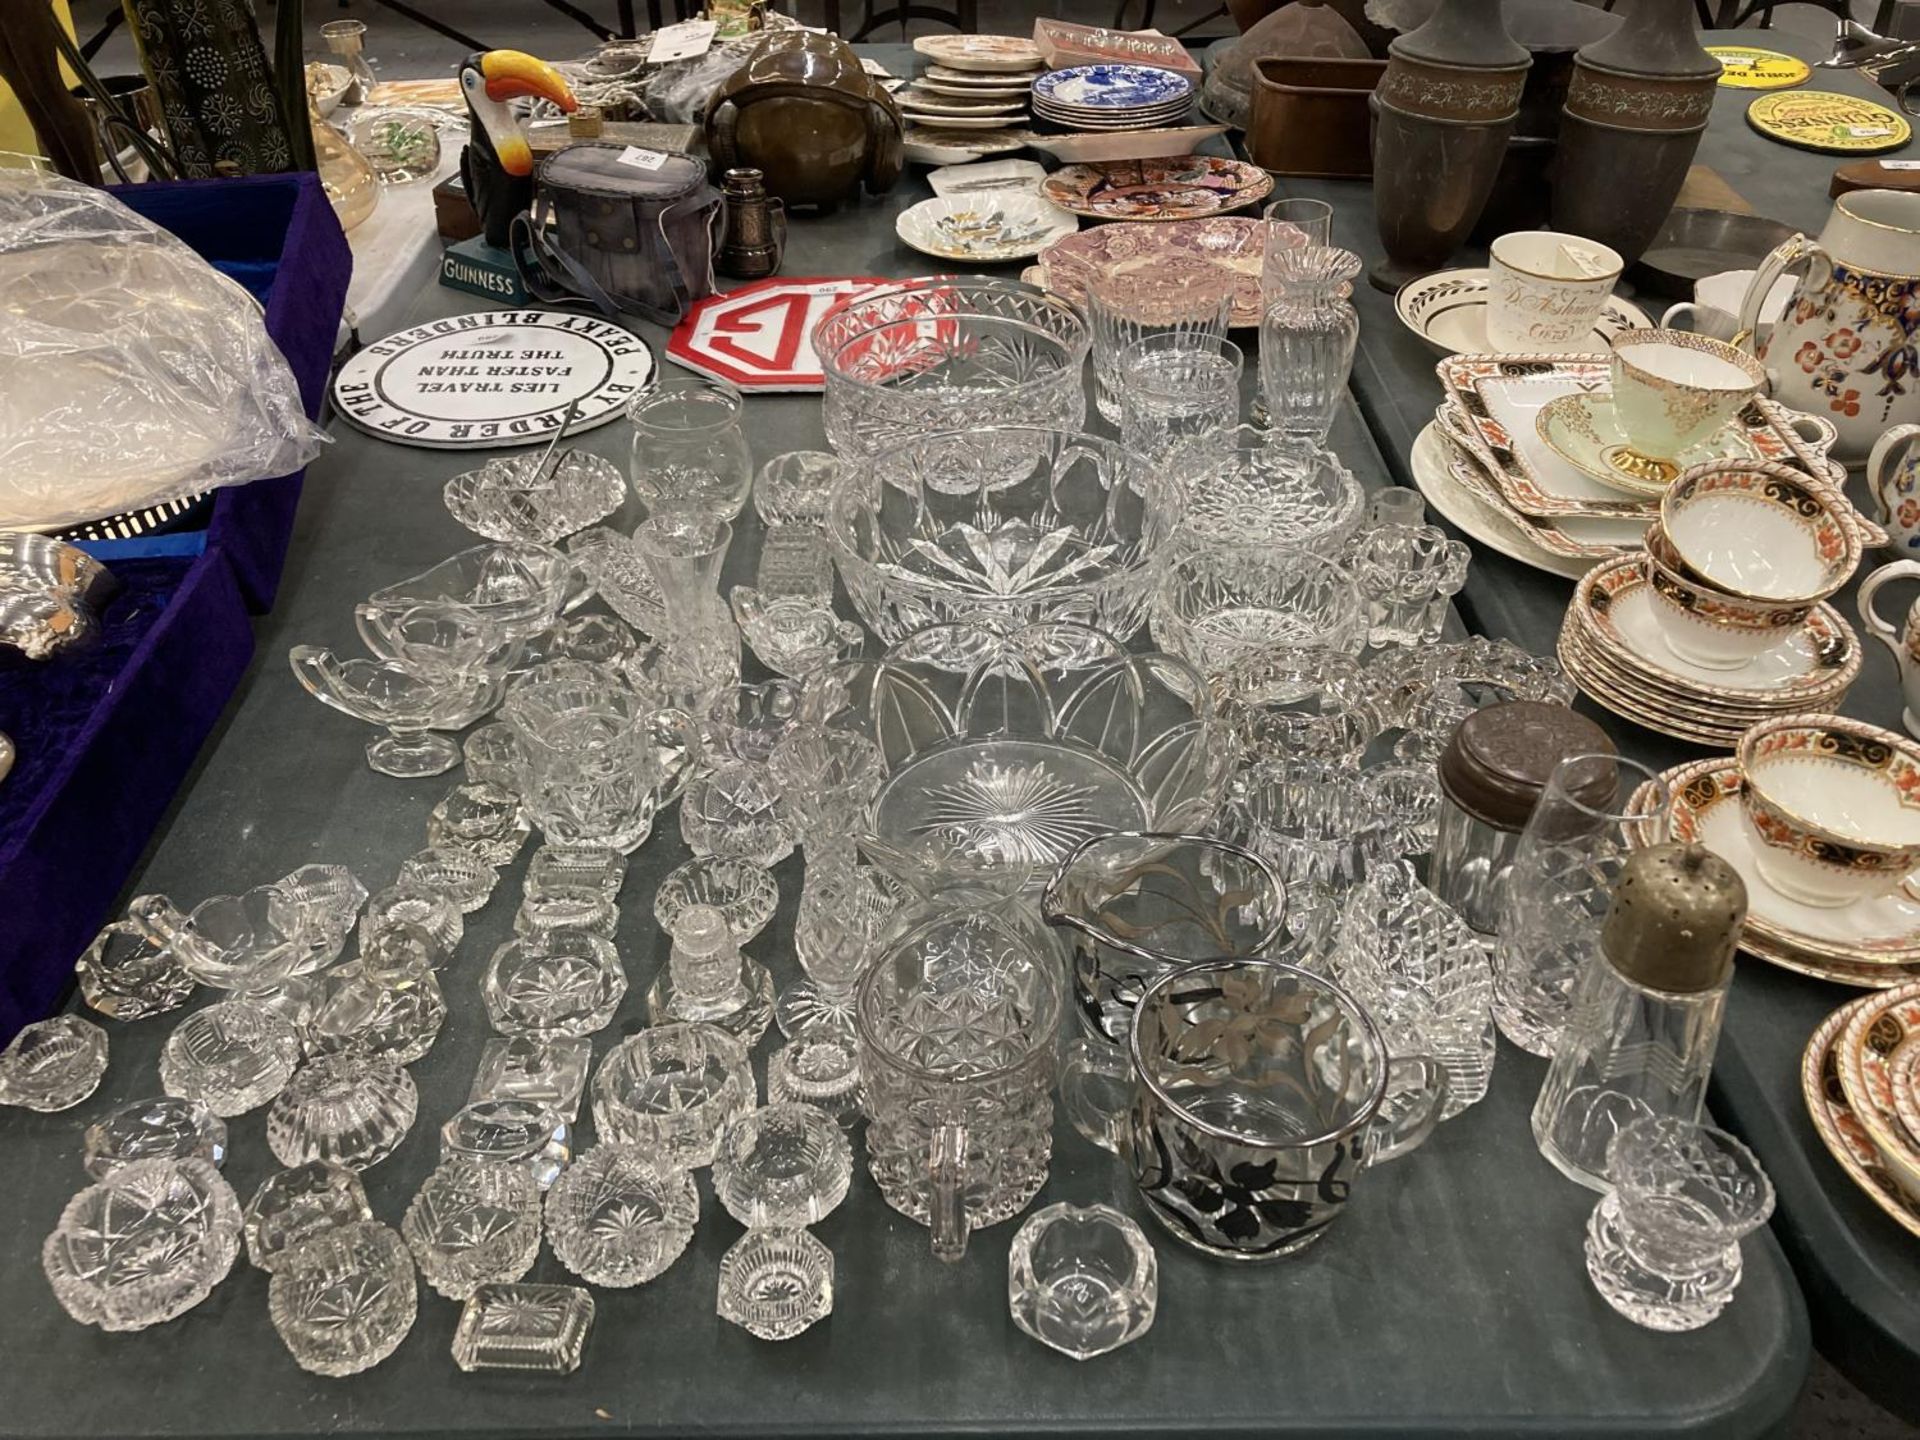 A LARGE QUANTITY OF GLASSWARE TO INCLUDE BOWLS, JUGS, VASES, ETC